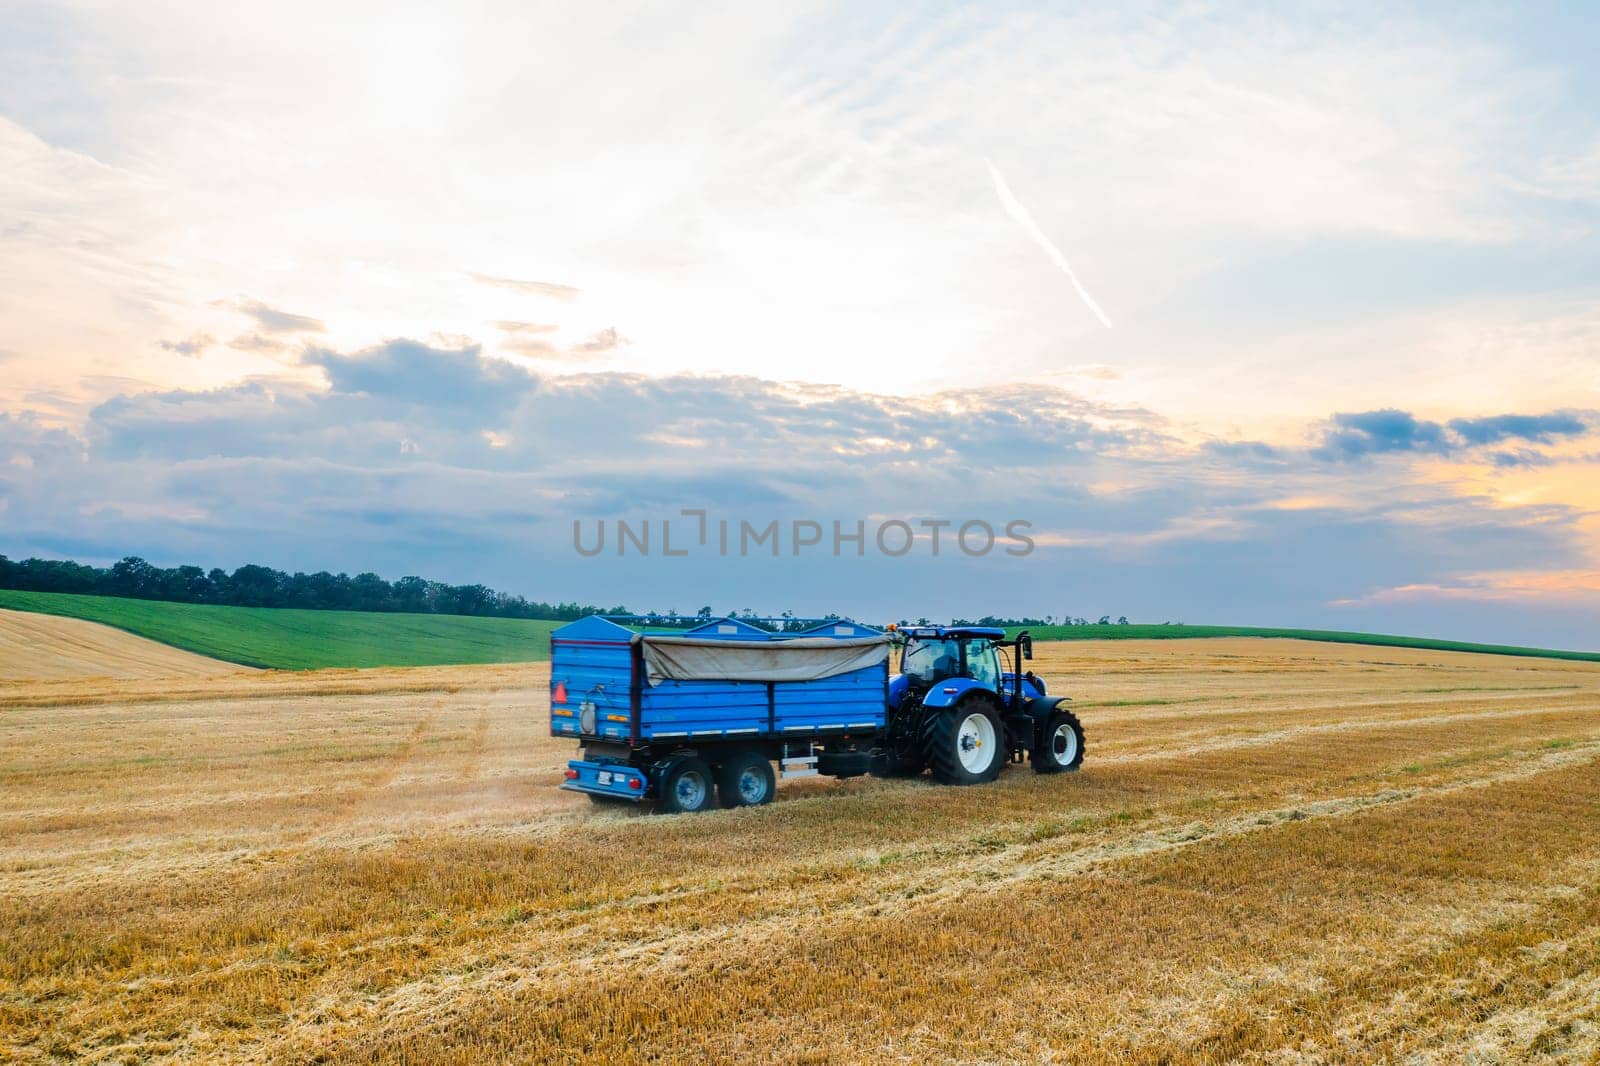 Tractor with trailer drives along reaped agricultural field by vladimka